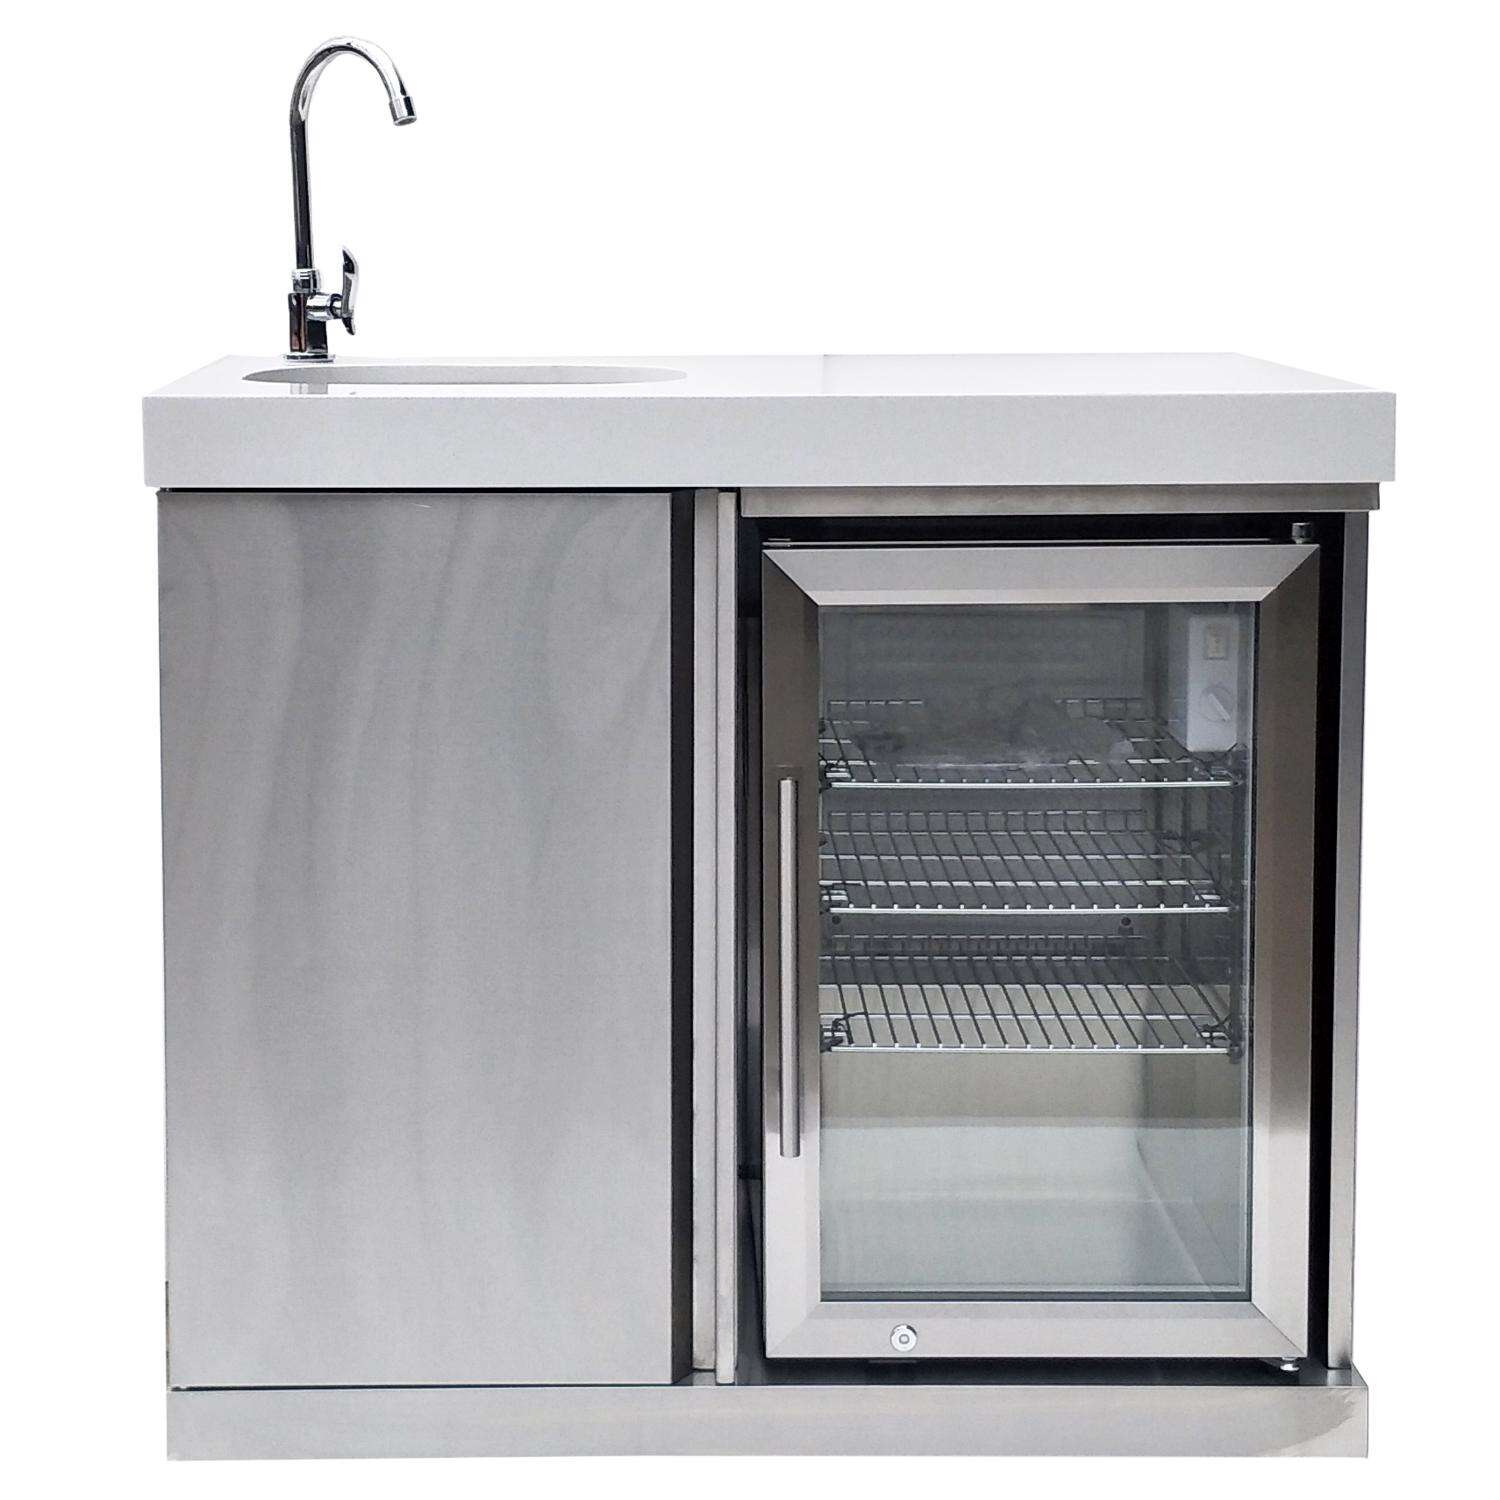 Mont Alpi Beverage Center Cabinet Module with Sink & 2.6 Cu. Ft. Outdoor Refrigerator in Stainless Steel (MASF)